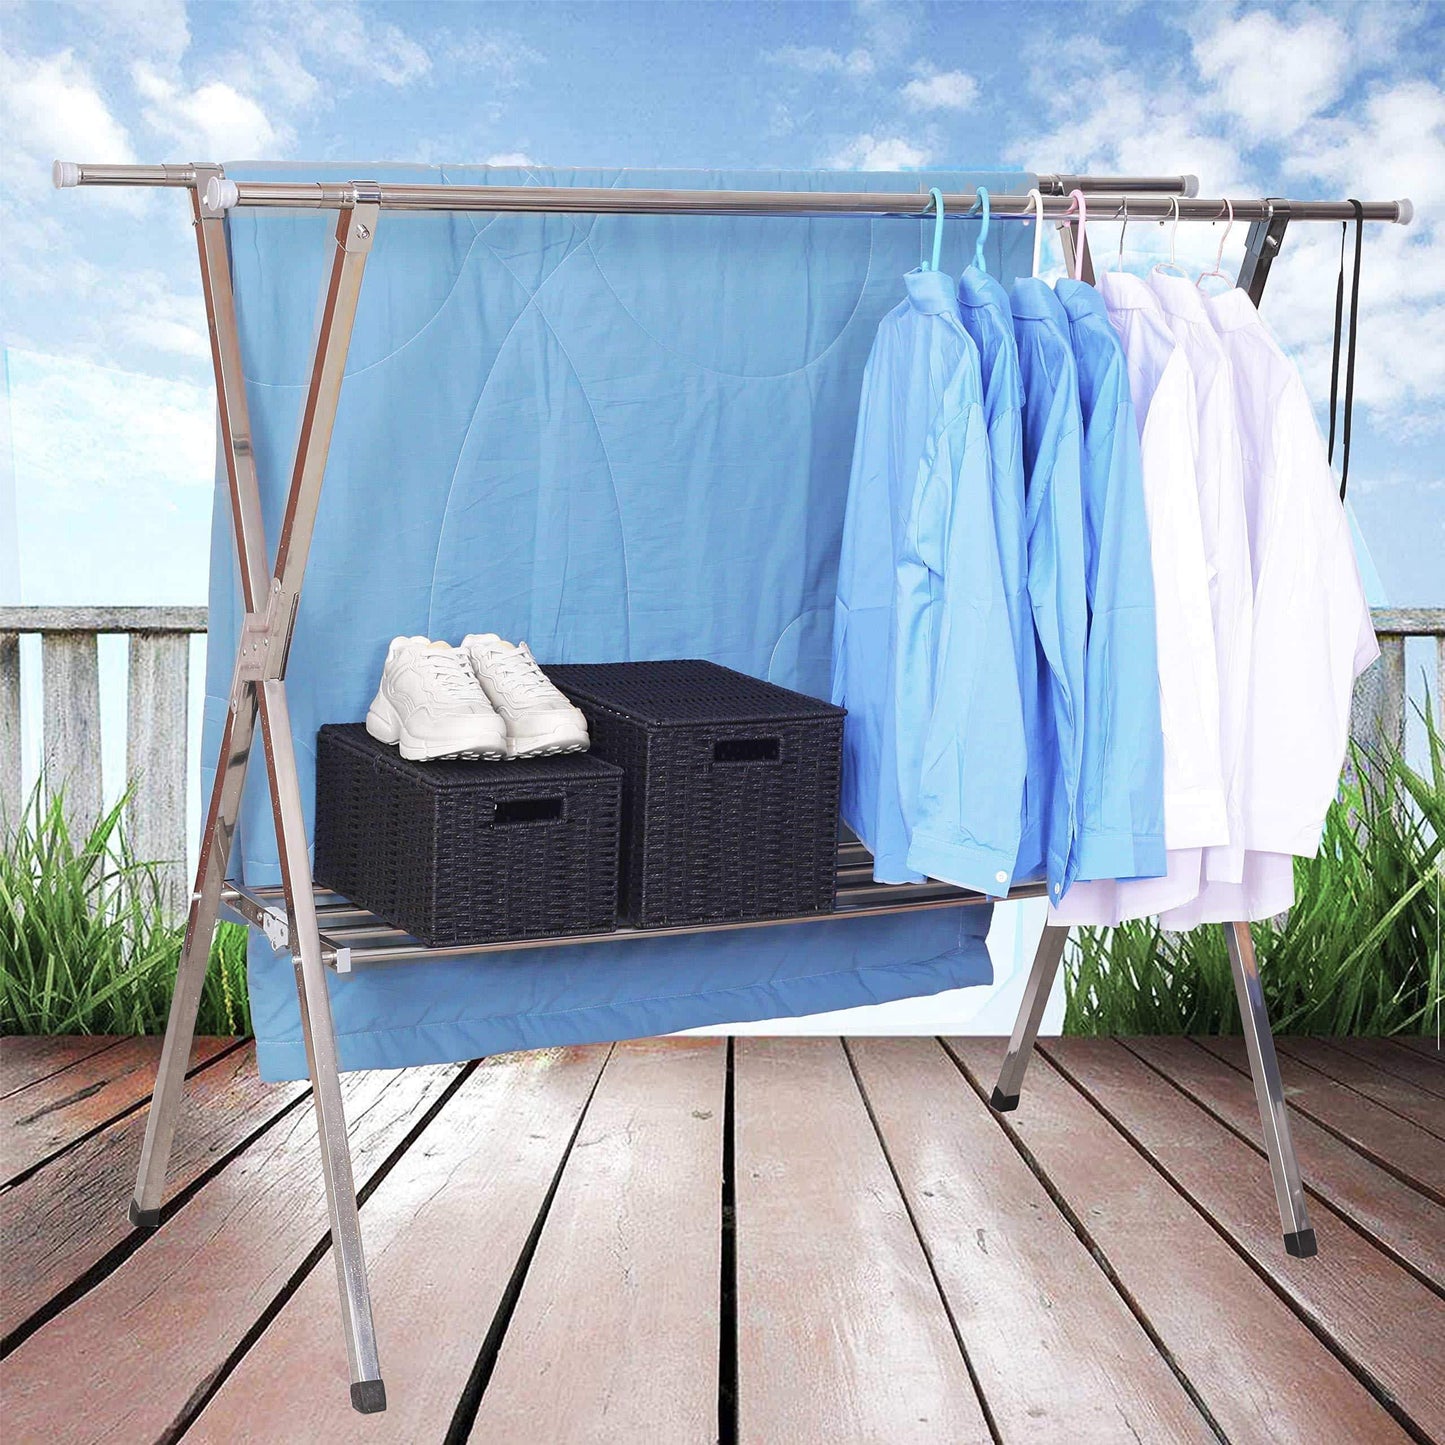 Heavy duty Large Stainless Steel Clothes Drying Rack Foldable Space Saving Retractable Rack Hanger From 55.2 to 78.8 inches w/Shoe Rack